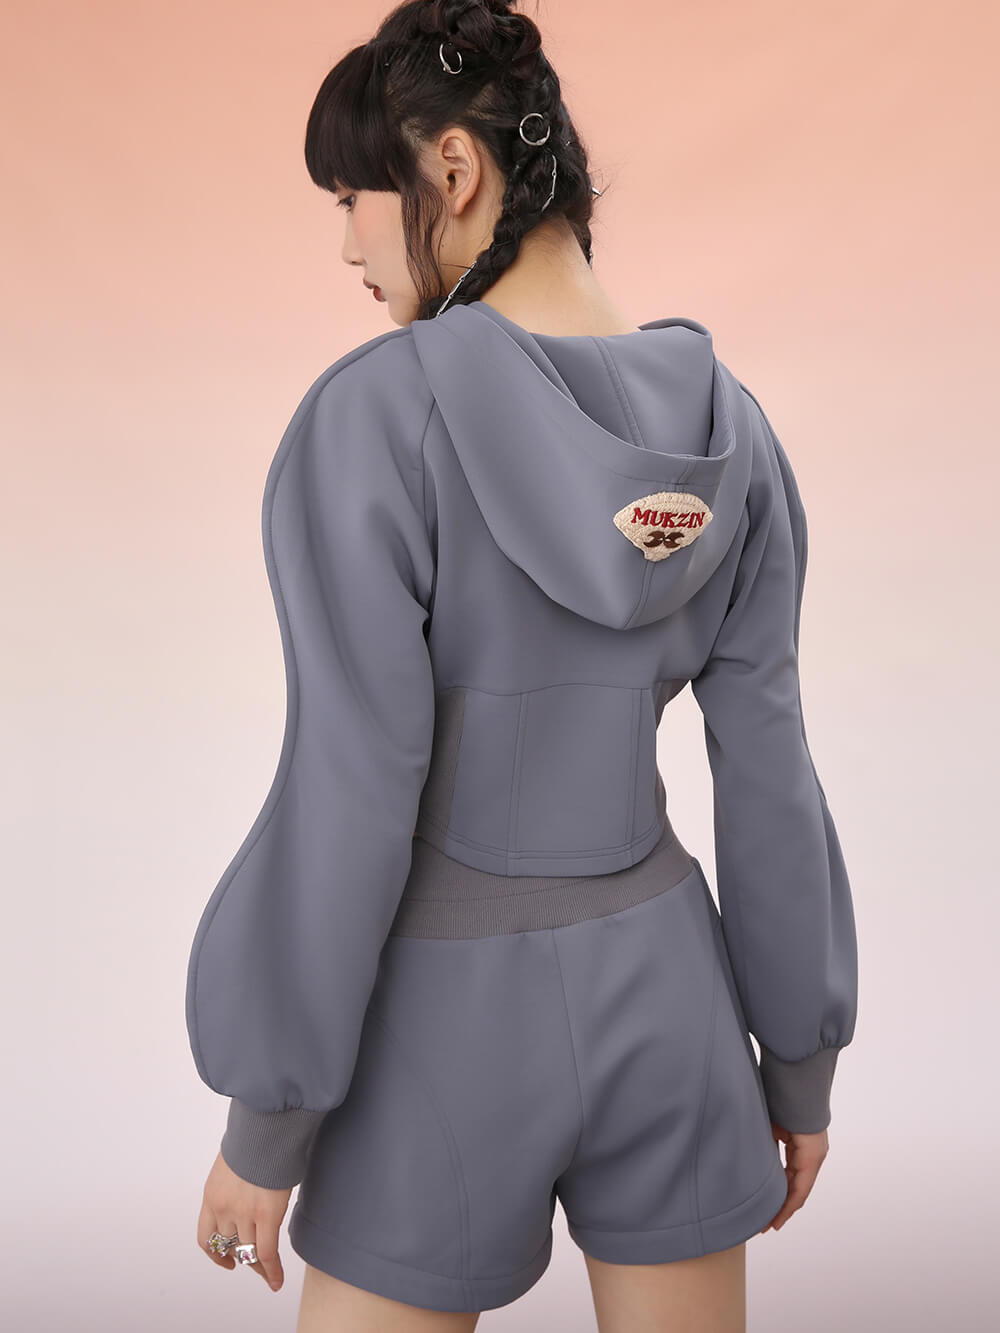 MUKZIN Oversized Embroidered Track Top Coat